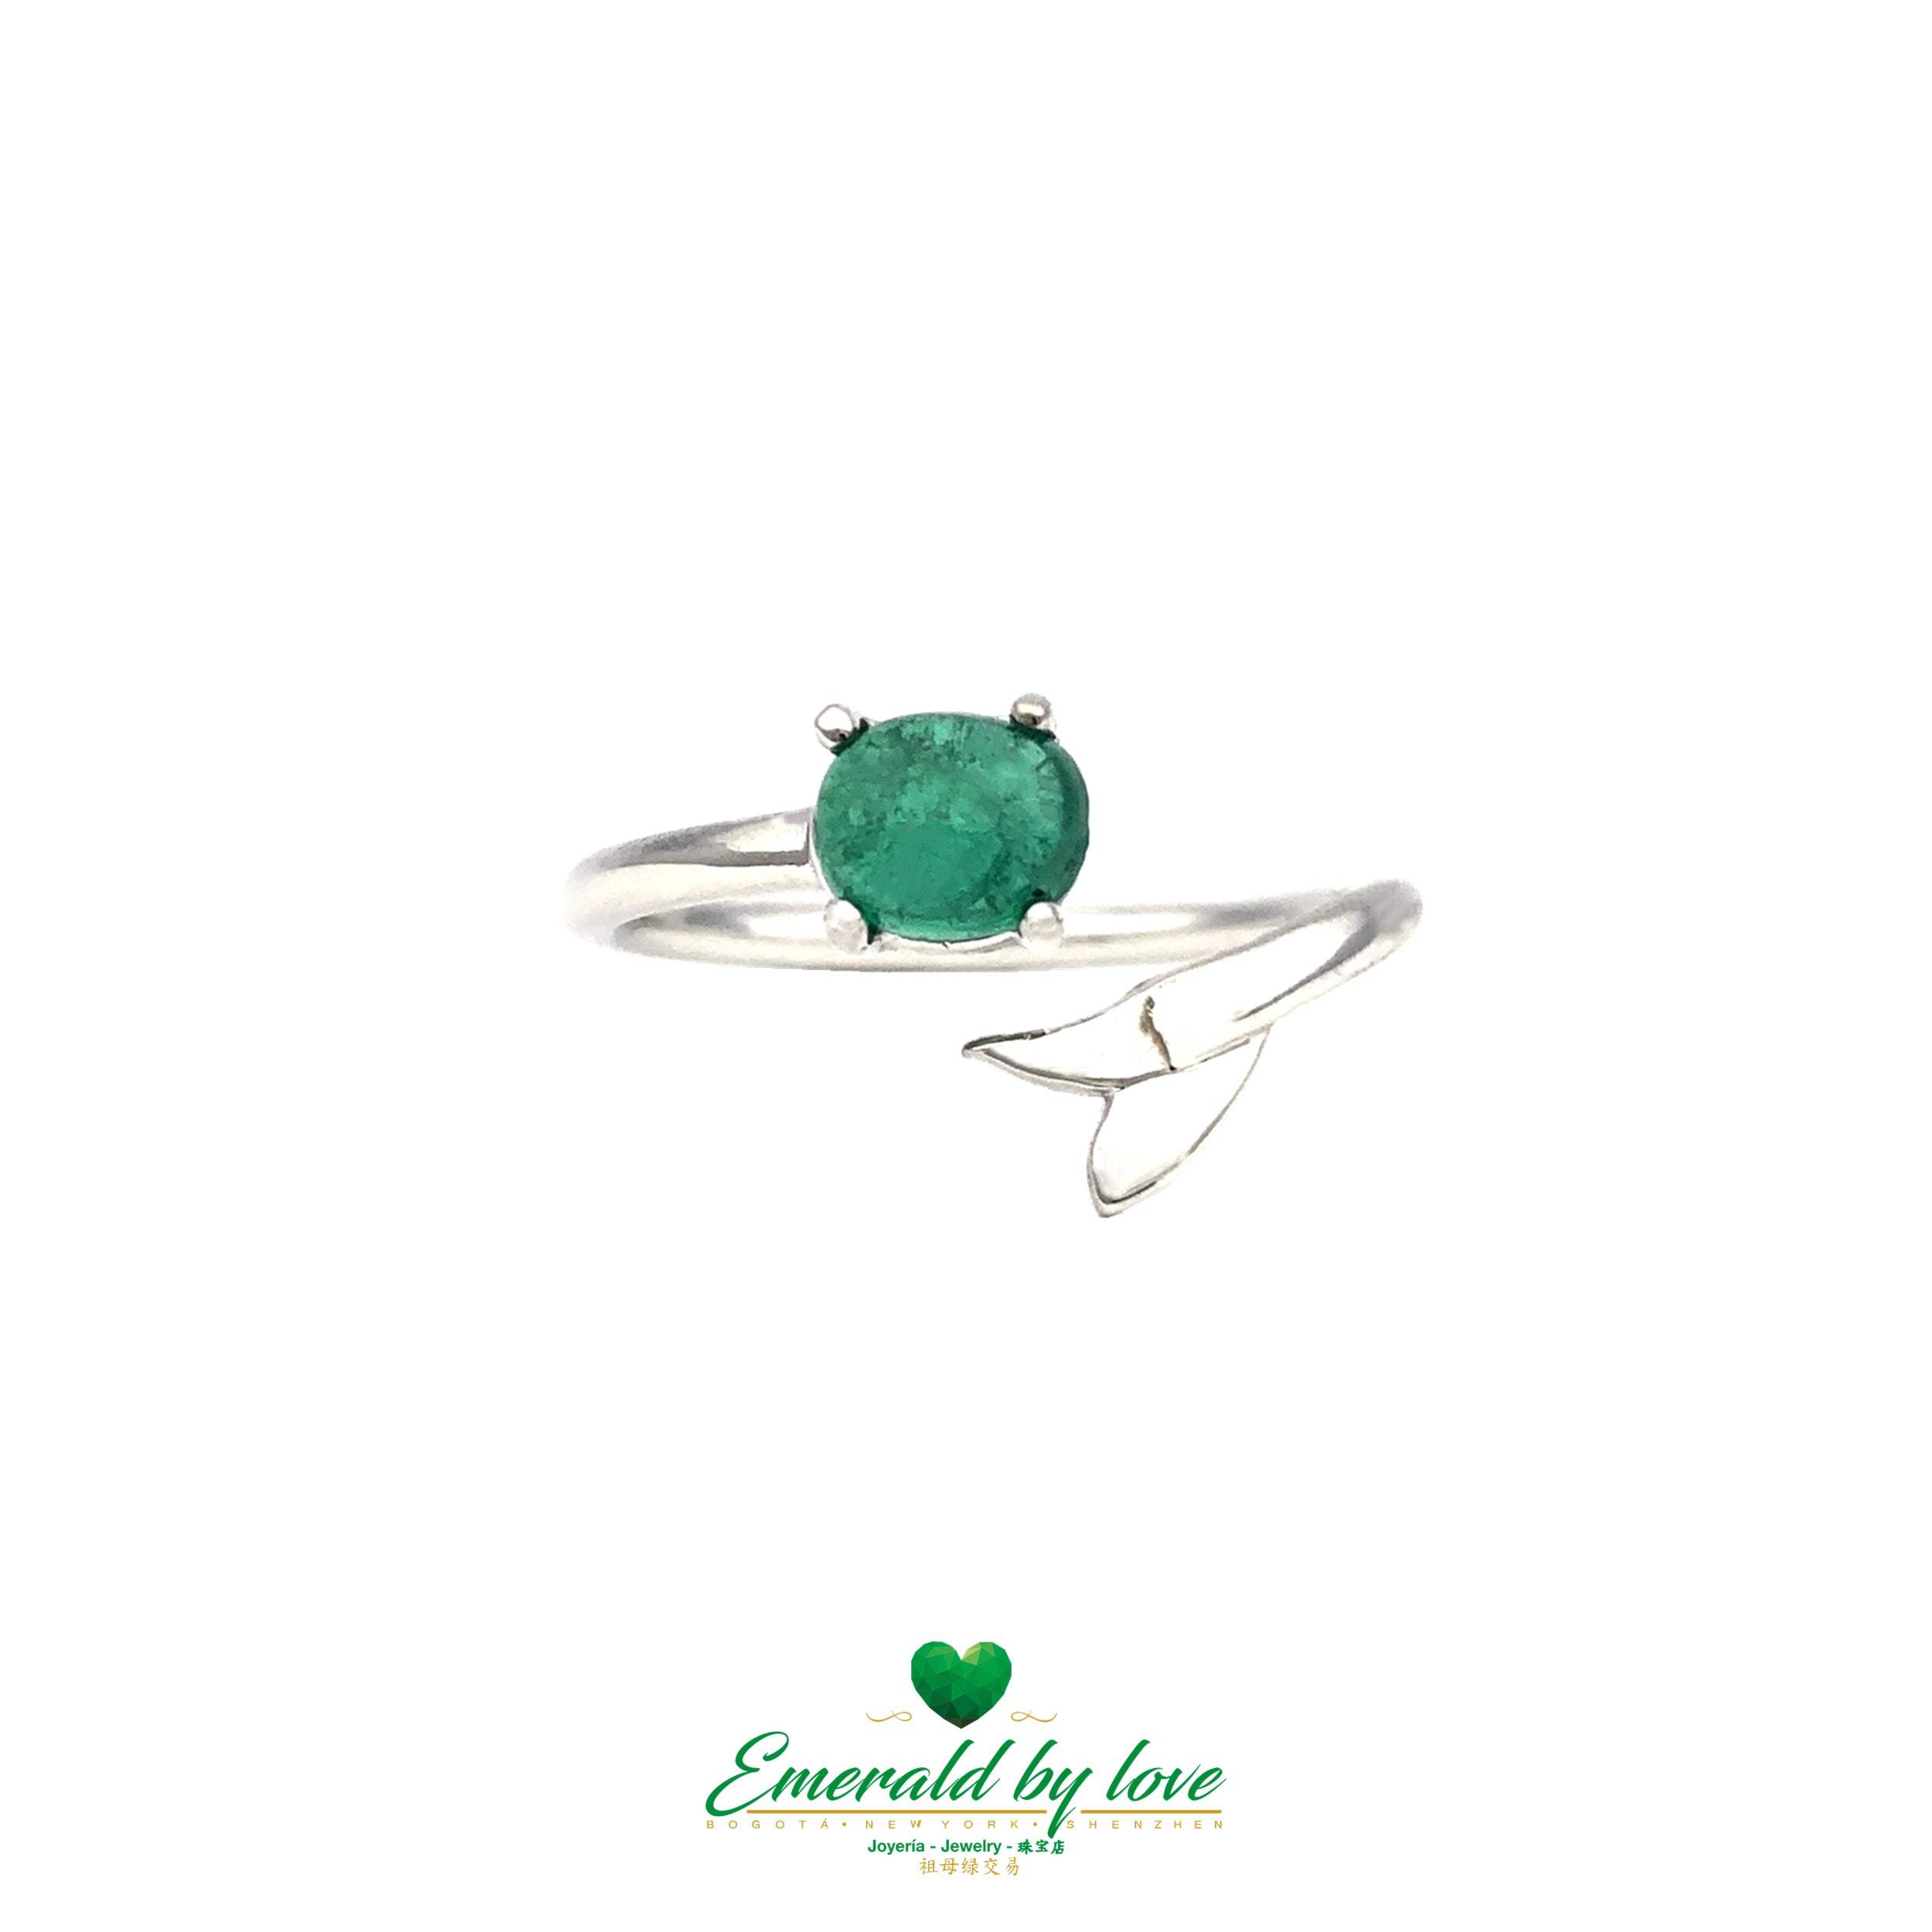 Mermaid Round-Shaped Colombian Emerald in 18k White Gold